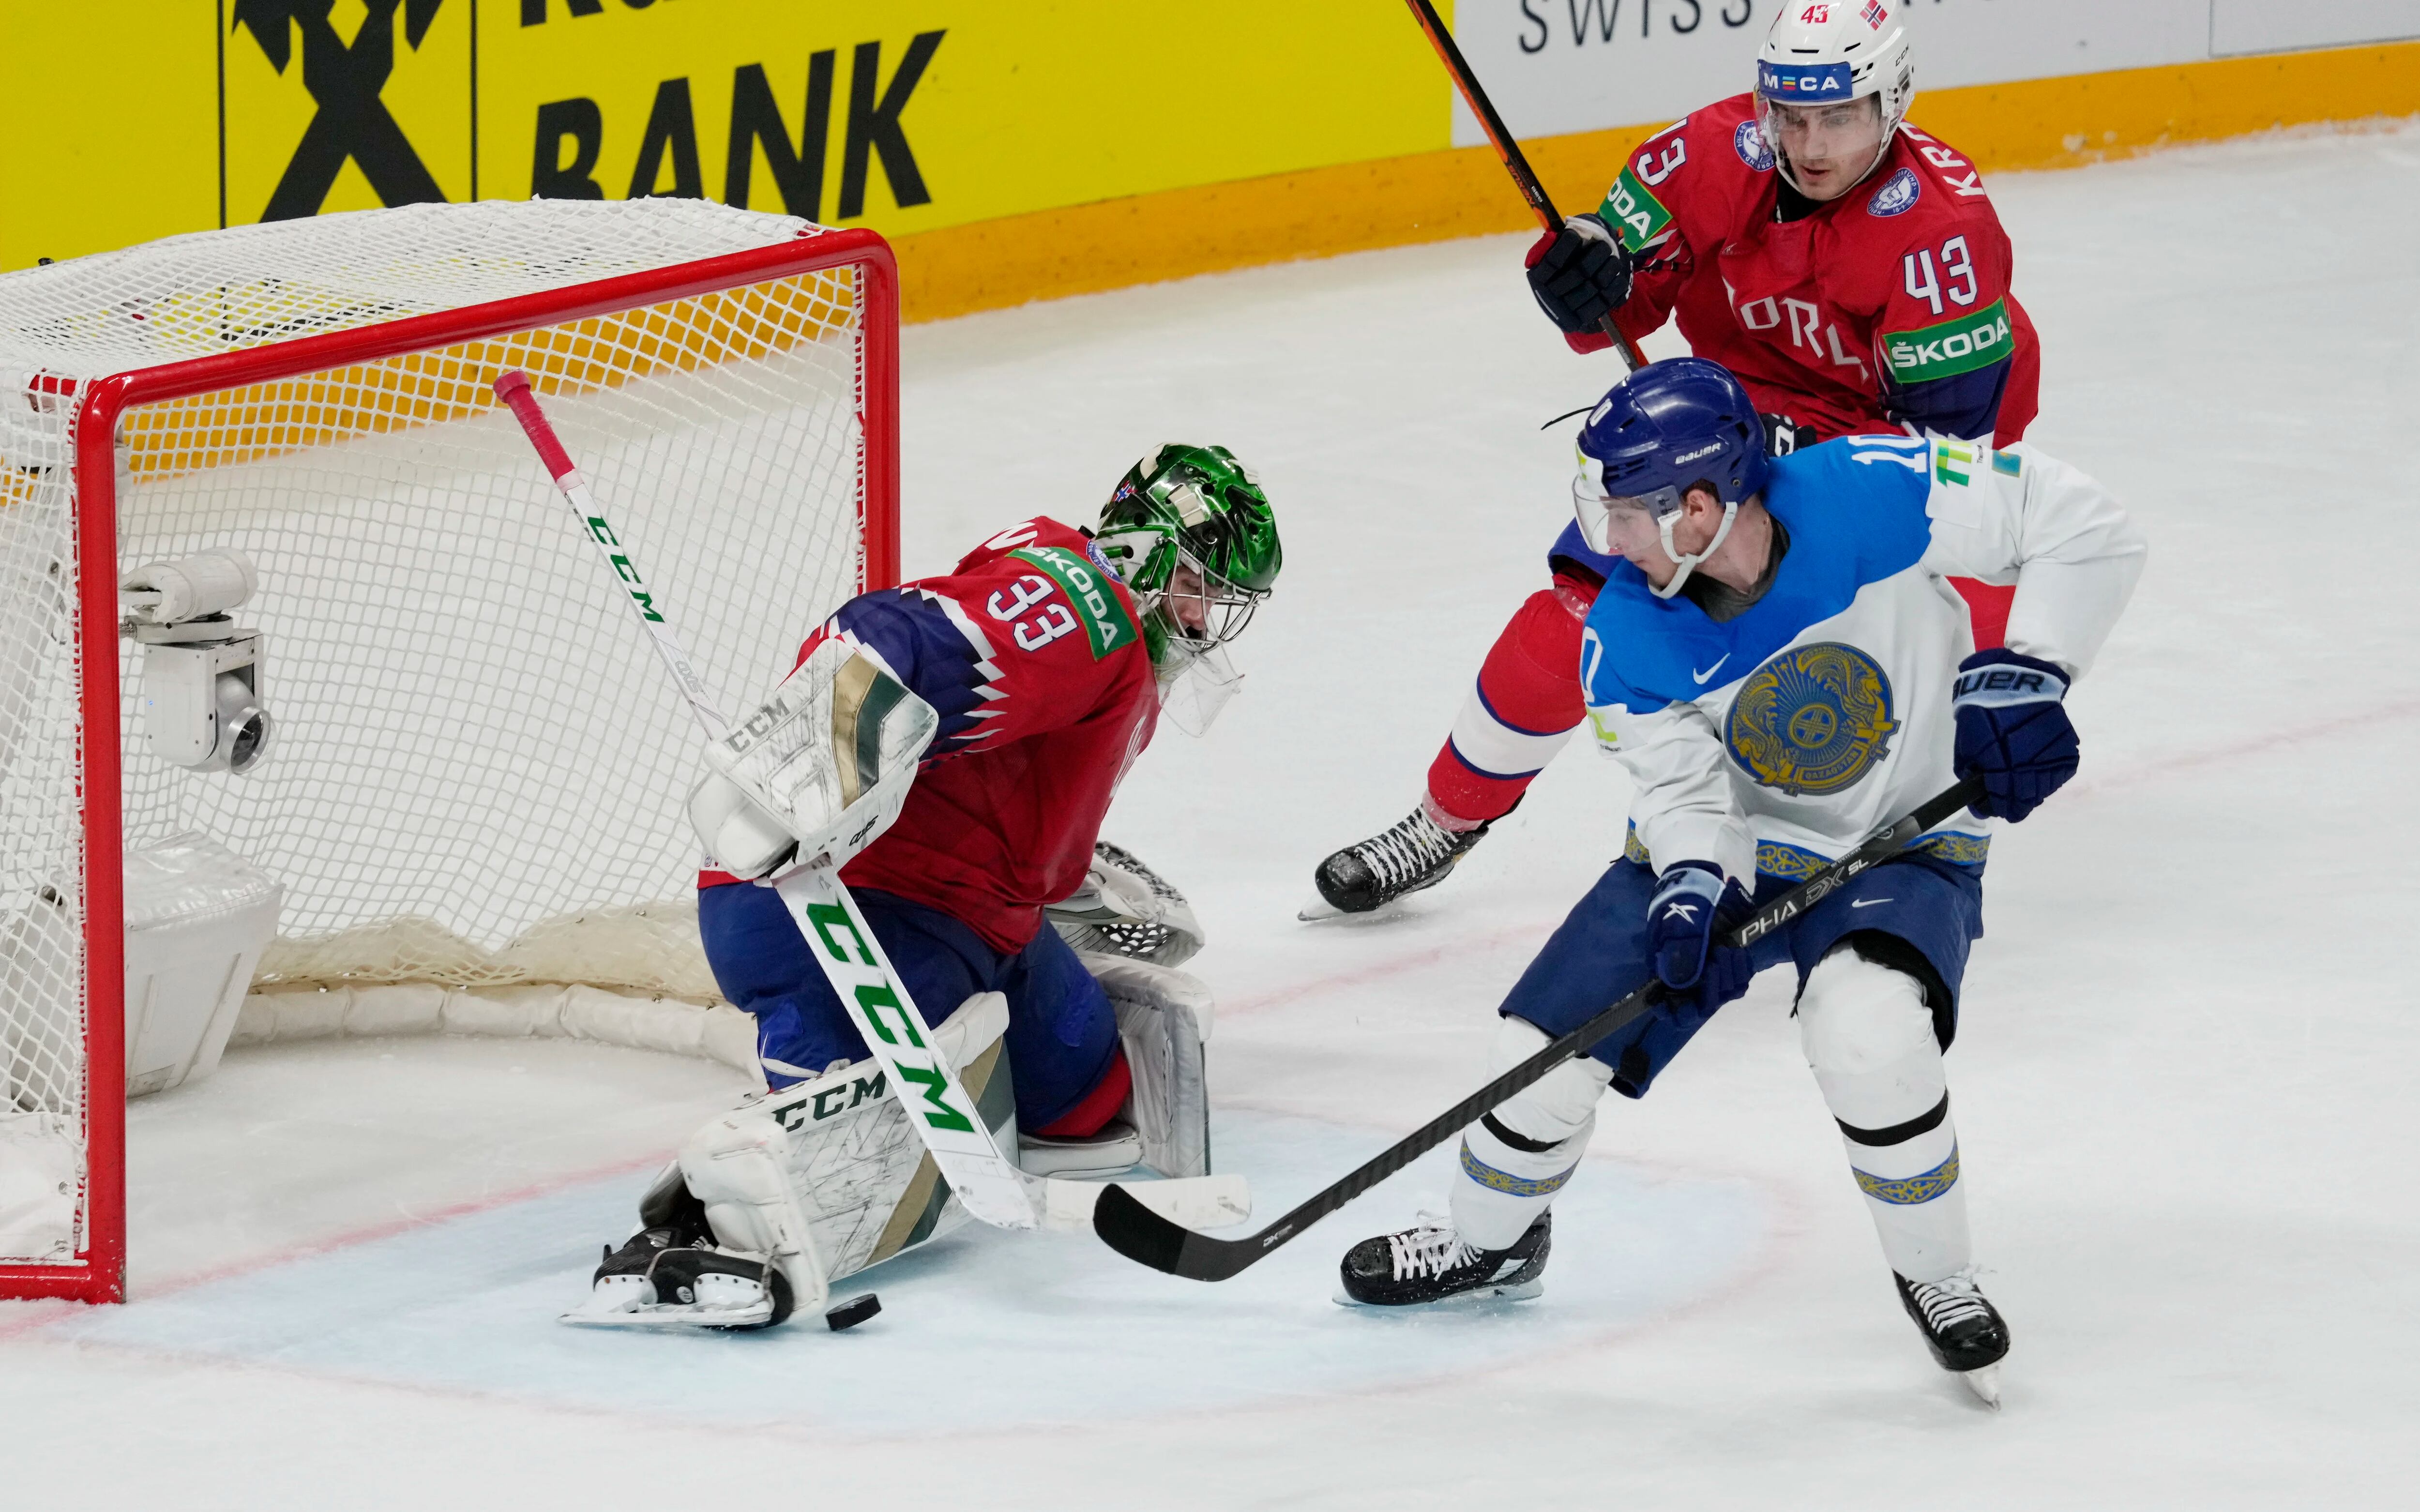 Germany, Kazakhstan and Norway all looking to host IIHF World Championship in 2027